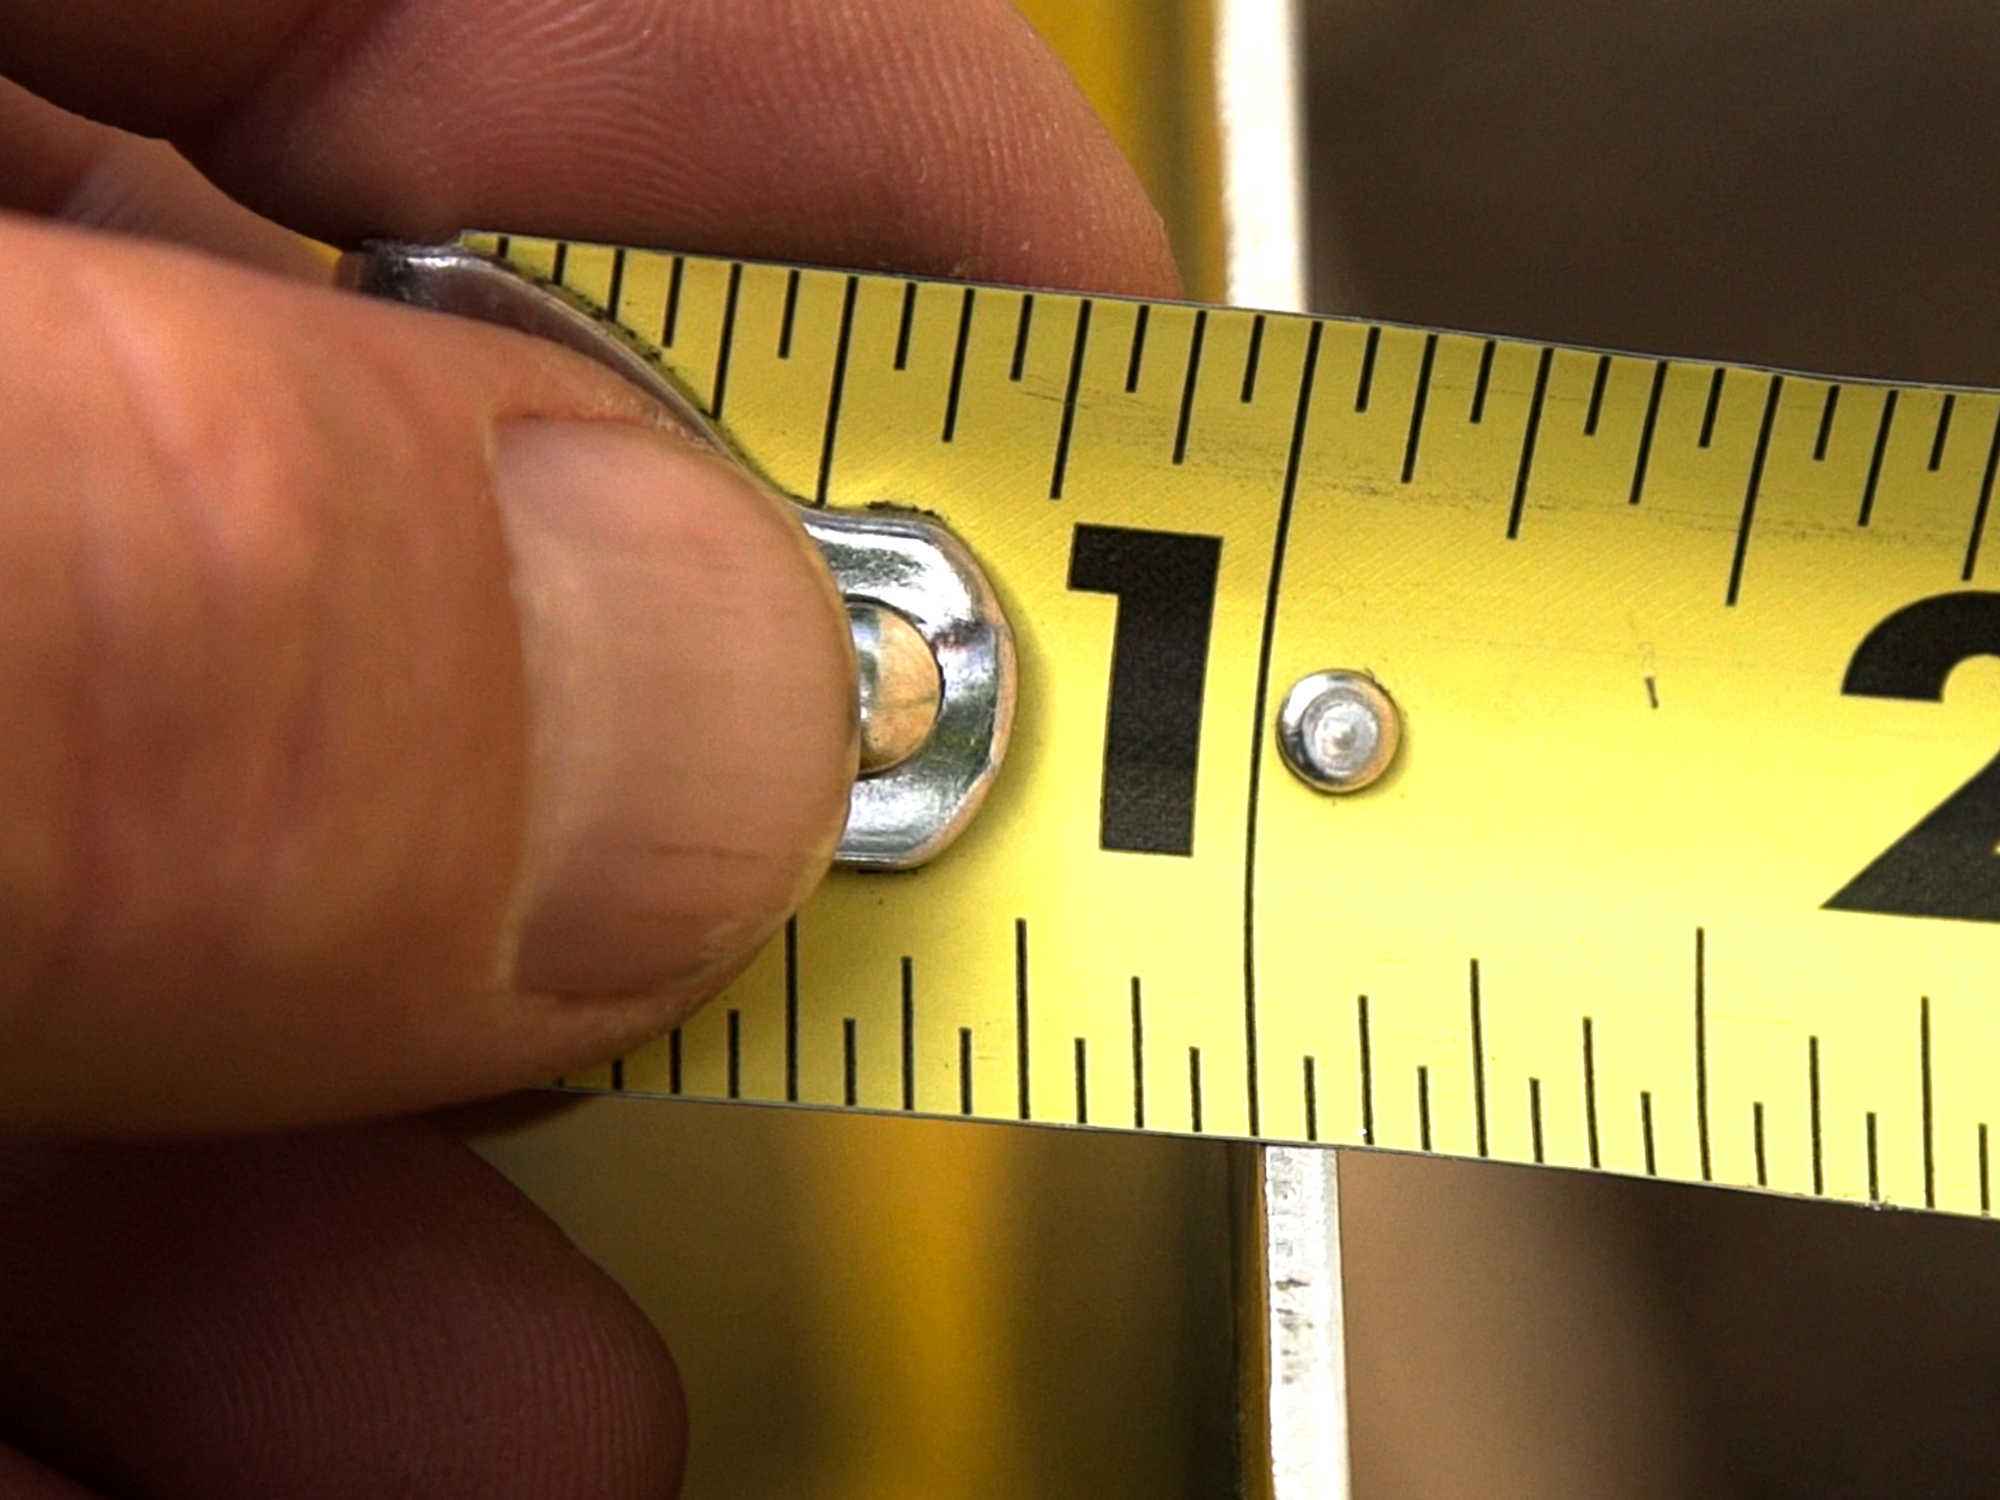 ruler showing the thickness of a metal sign, which appears to be approximately 1 little line and a half from the biggest line